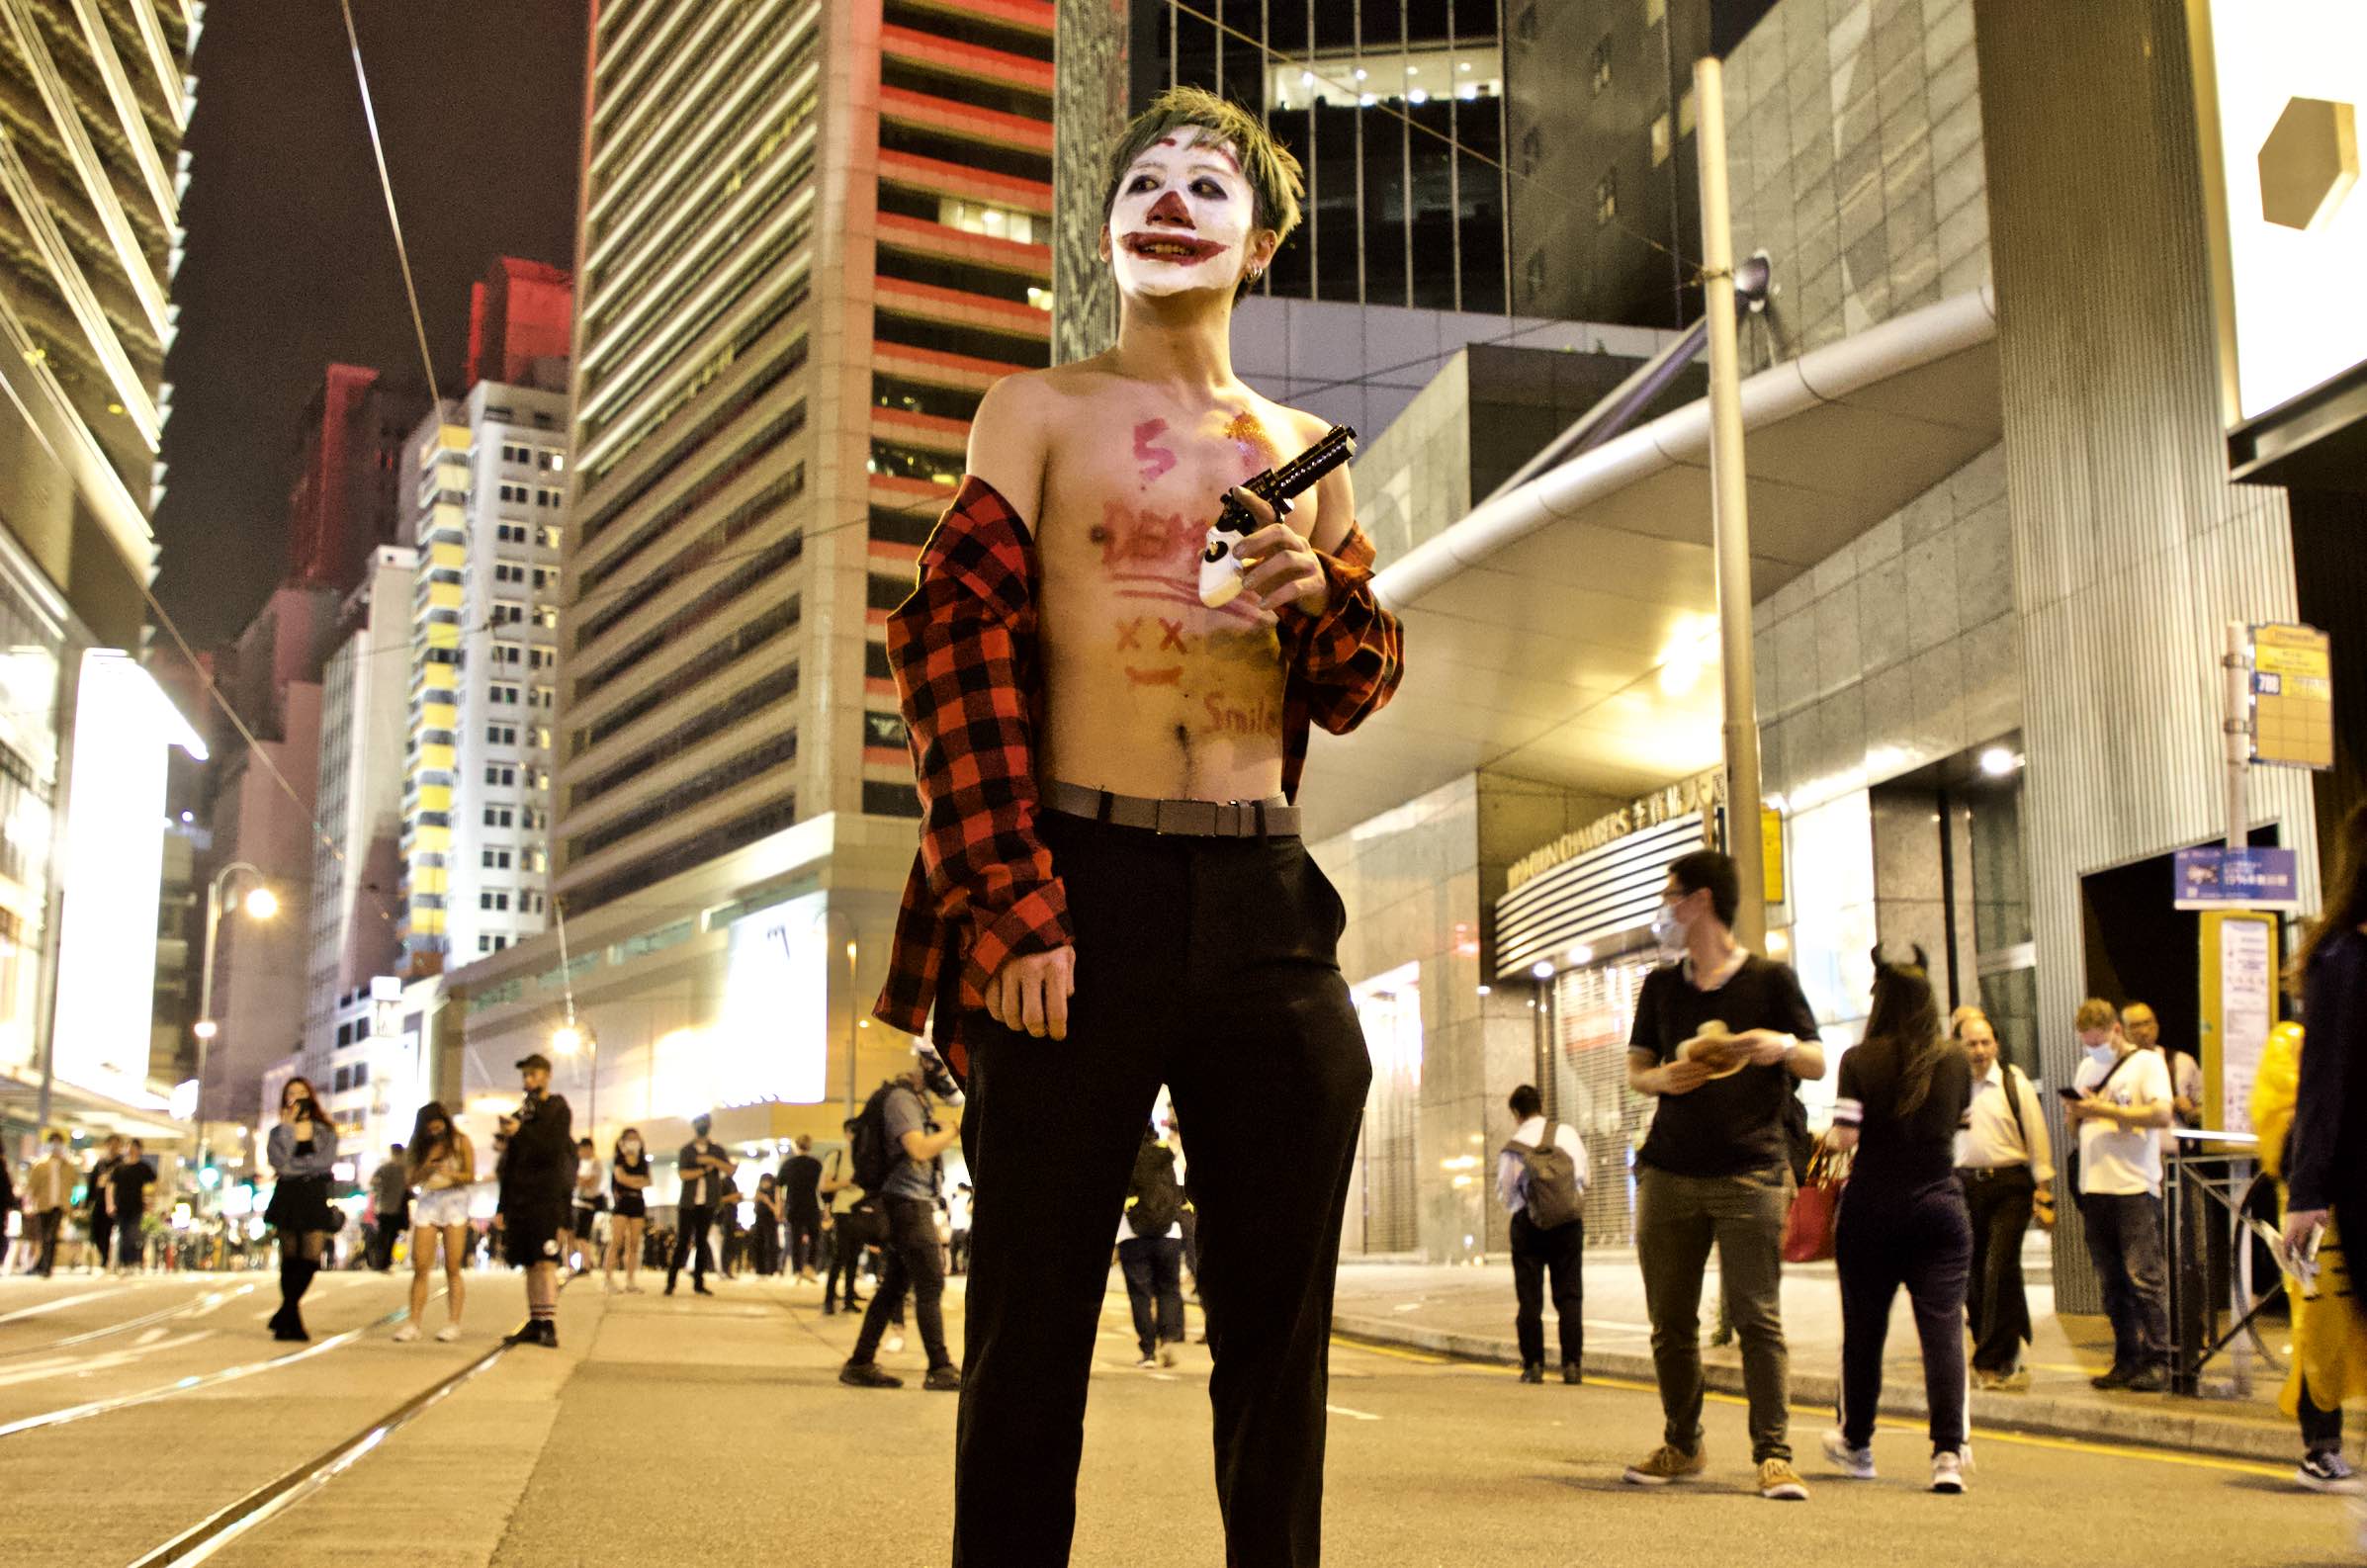 A protester in costume at last night’s Halloween rally. Photo by Vicky Wong.